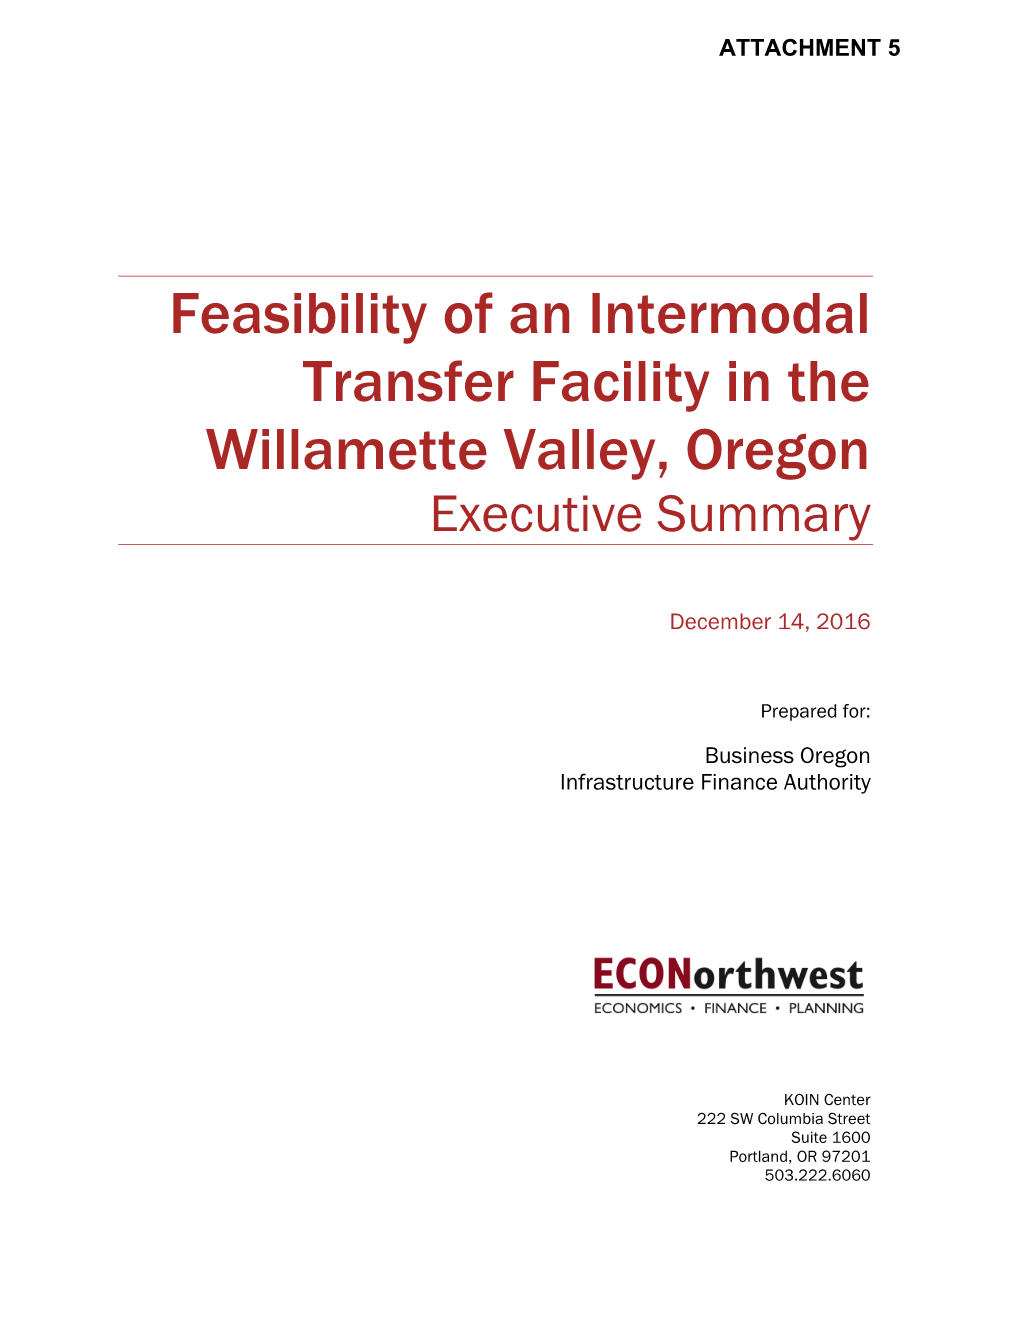 Feasibility of an Intermodal Transfer Facility in the Willamette Valley, Oregon Executive Summary